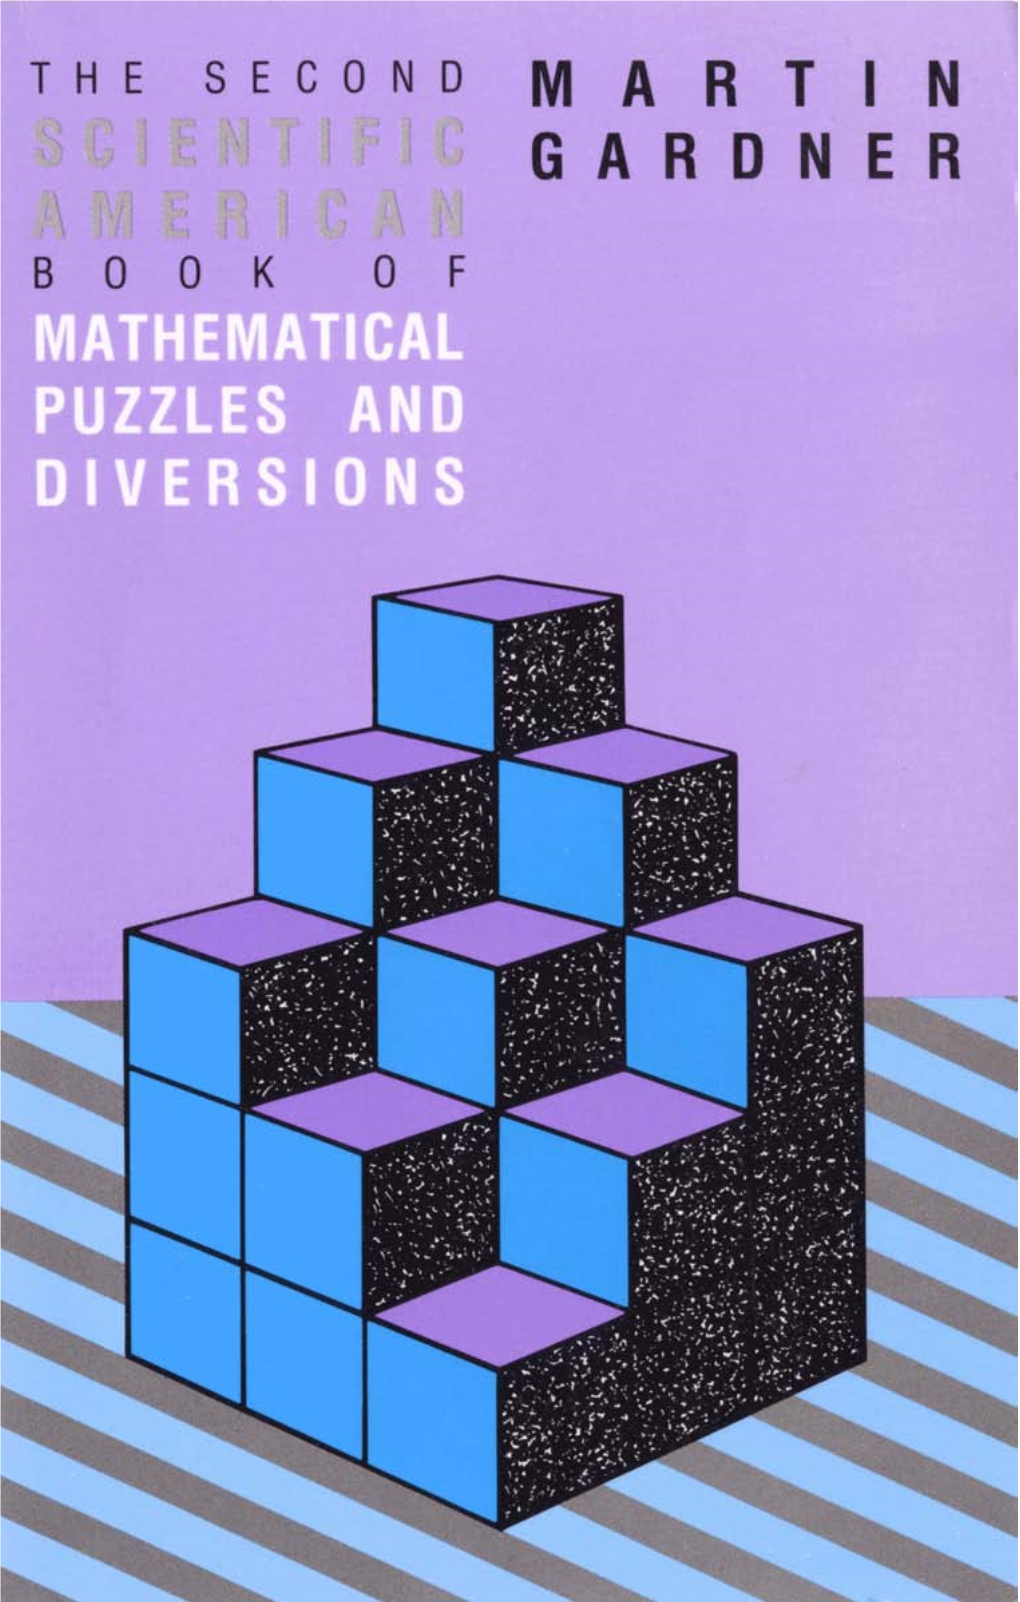 The Second Book of Mathematical Puzzles and Diversions